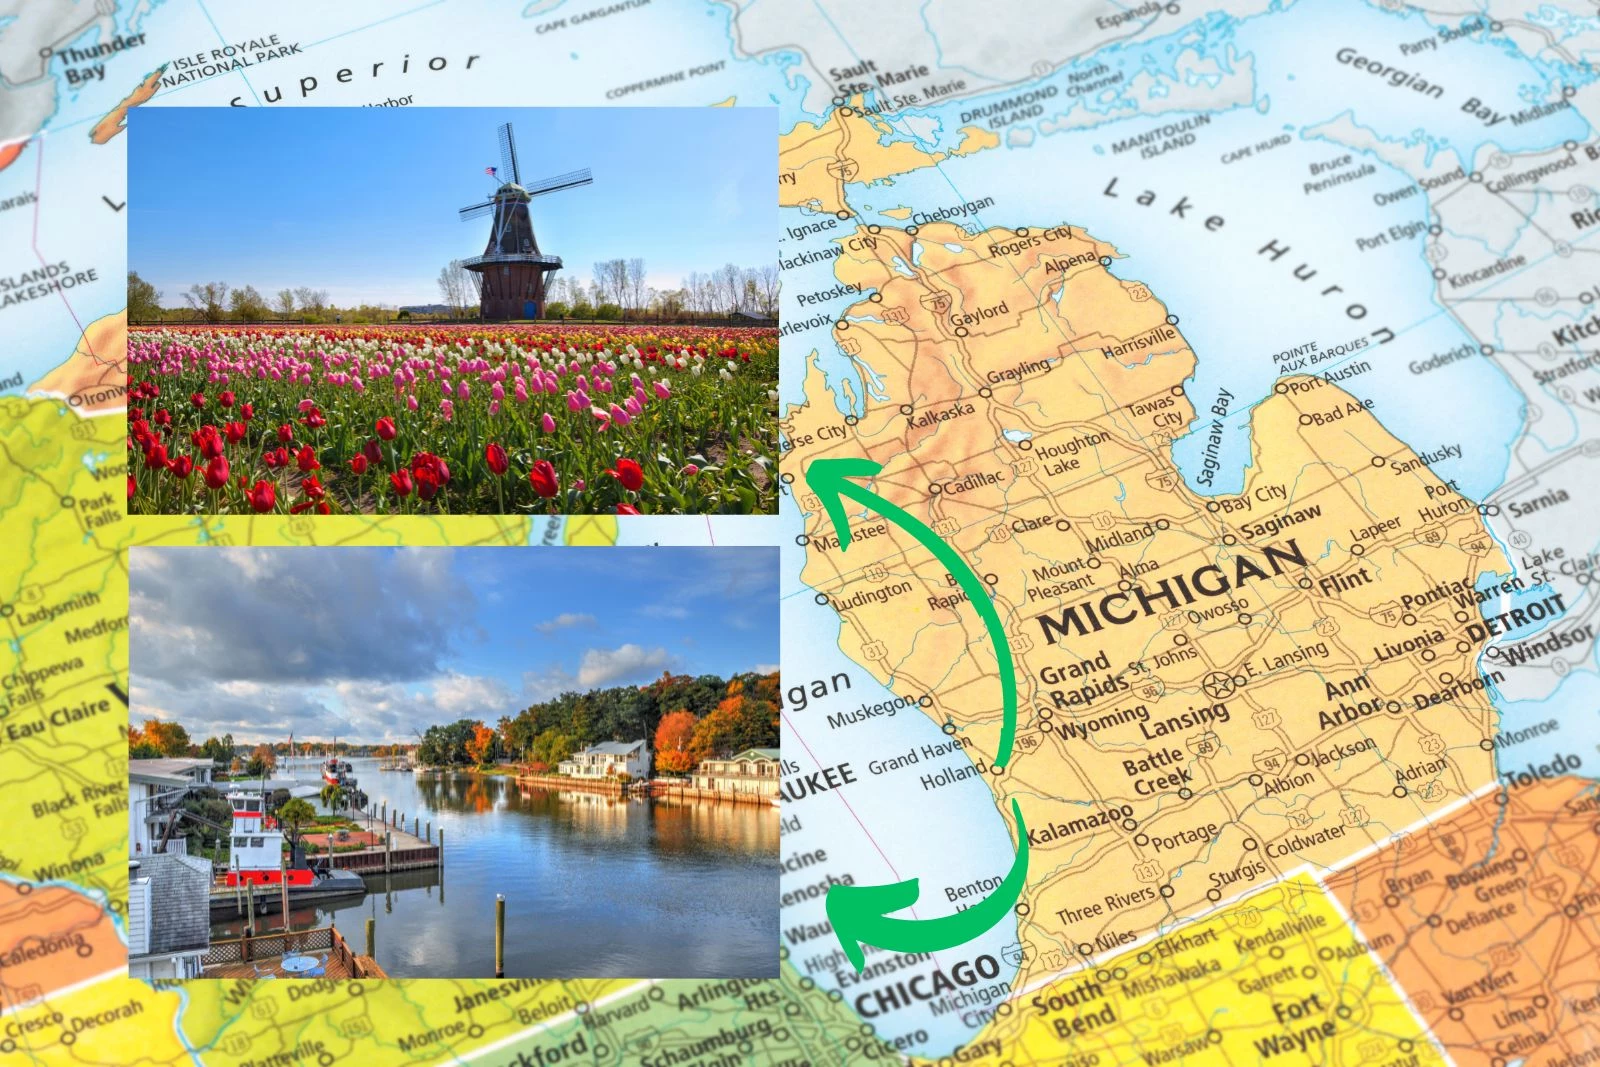 Michigan Has 2 Of The “Most Picturesque Small Towns” In The US